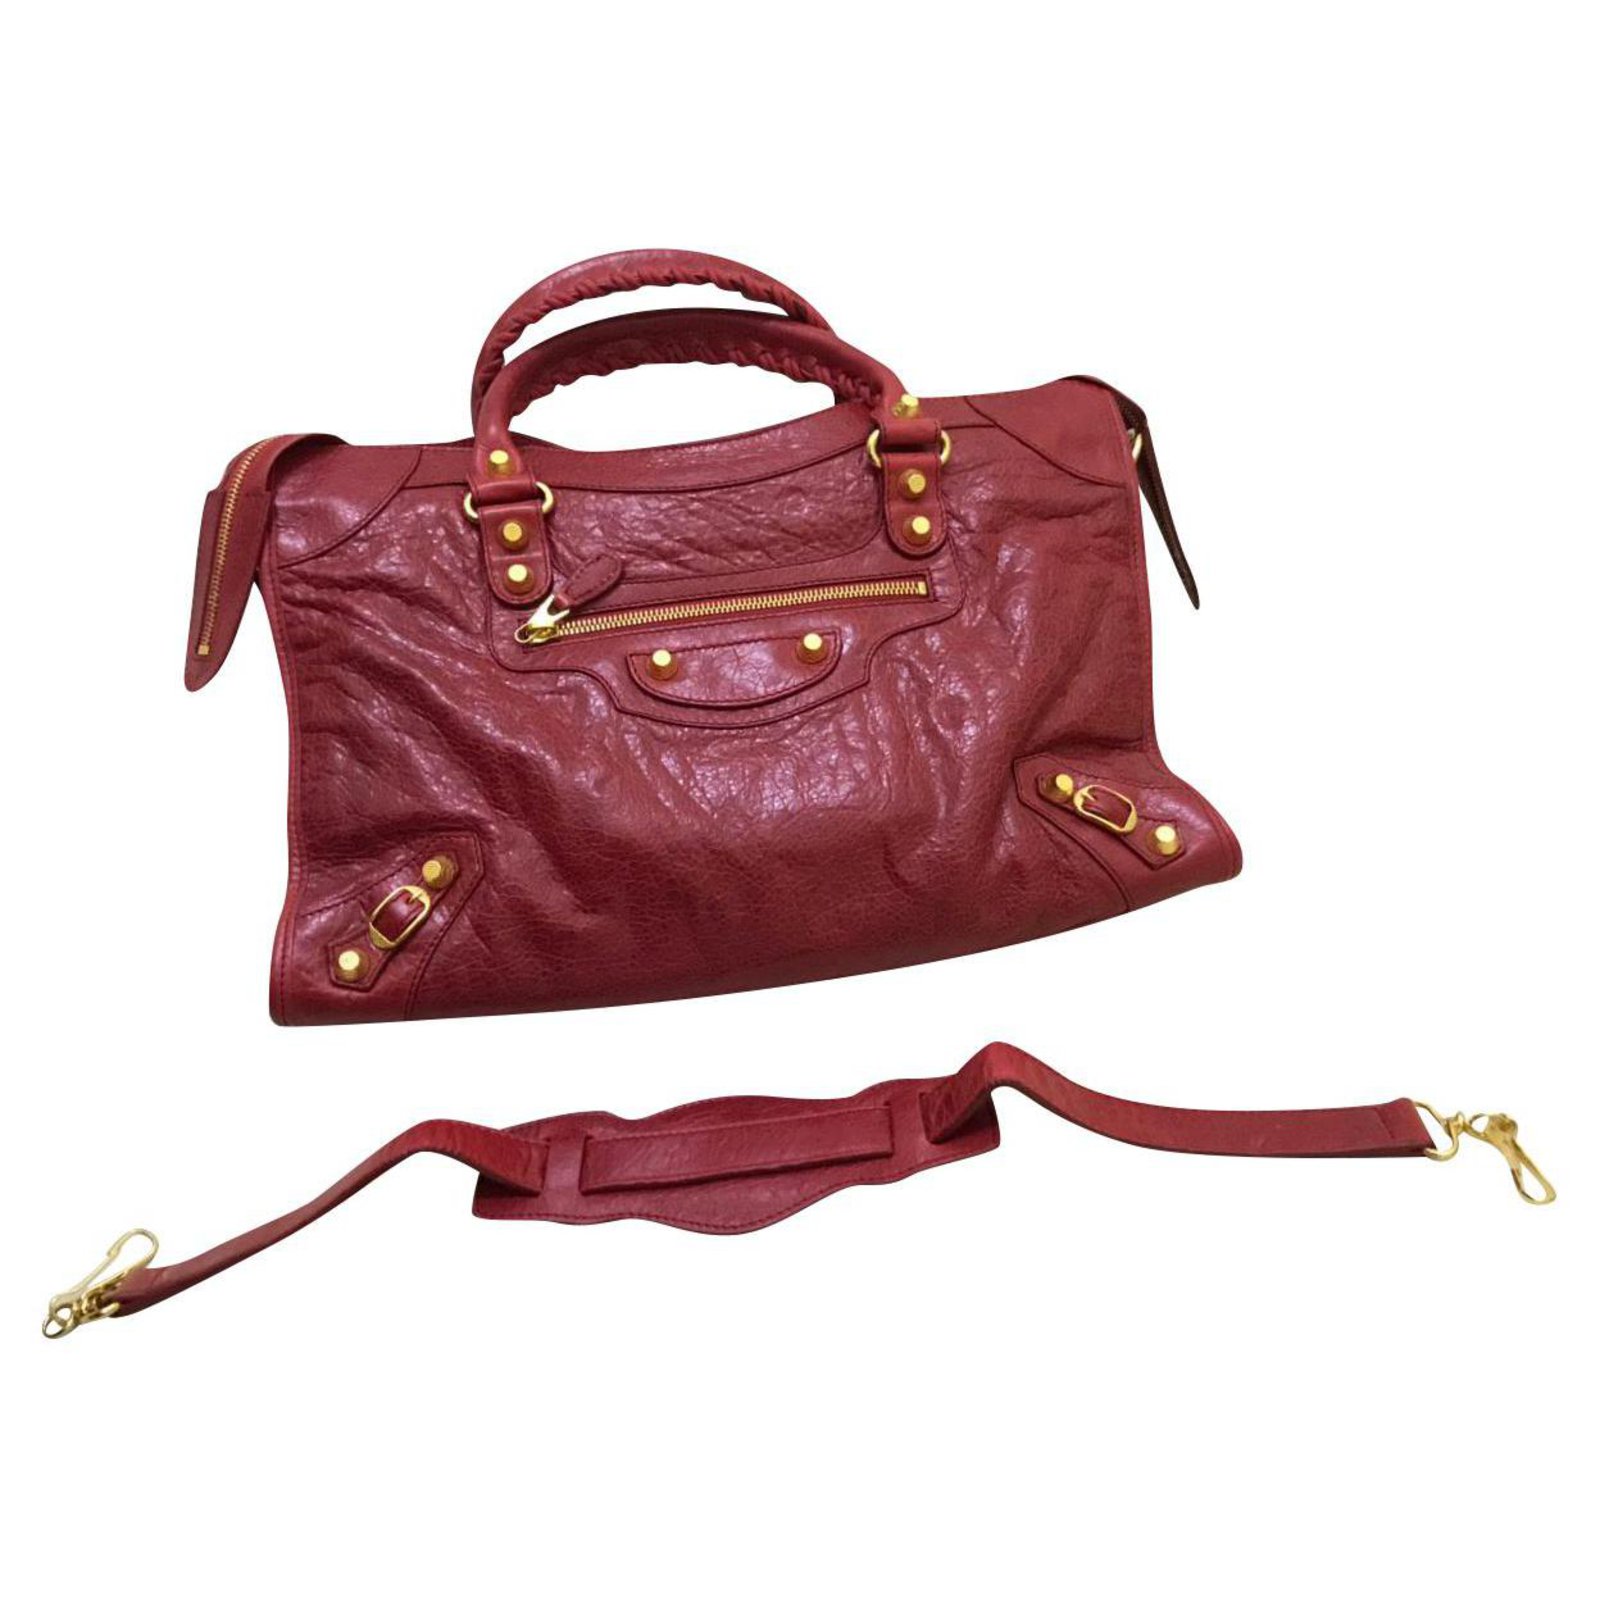 Balenciaga City Bag in Red Aged Leather For Sale at 1stDibs  balenciaga  173082 200047 balenciaga city bag red bruce hoeksema age